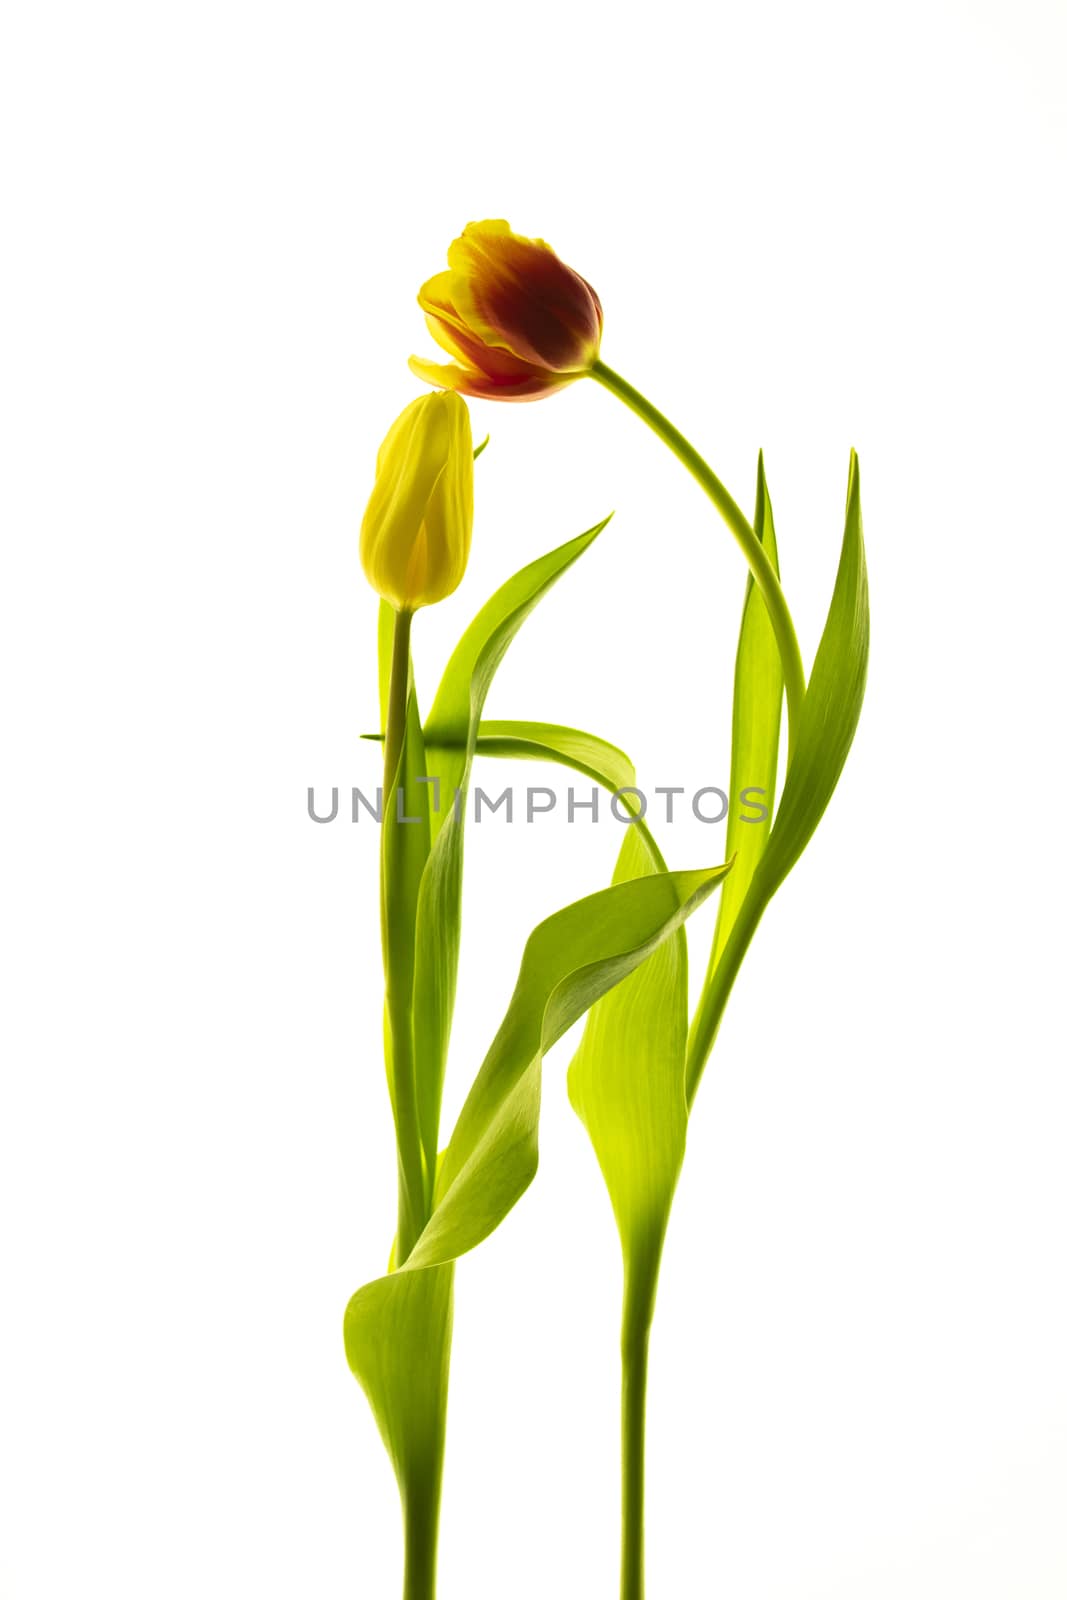 Tulips flower collection isolated on white background.